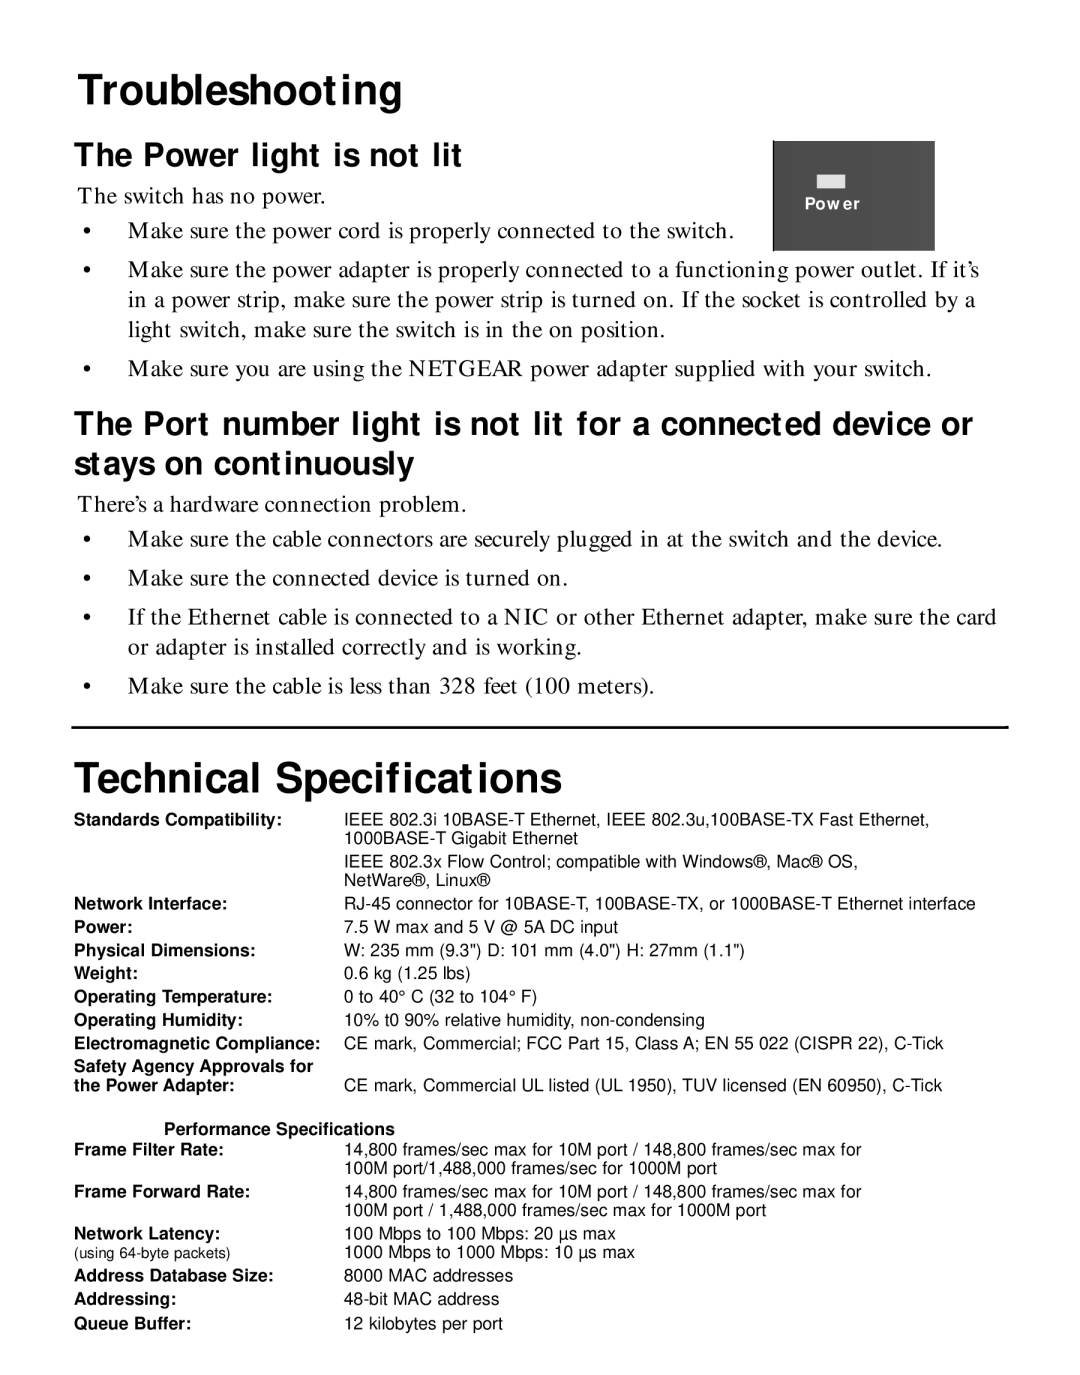 NETGEAR GS104 manual Technical Specifications, The switch has no power, Troubleshooting, The Power light is not lit 